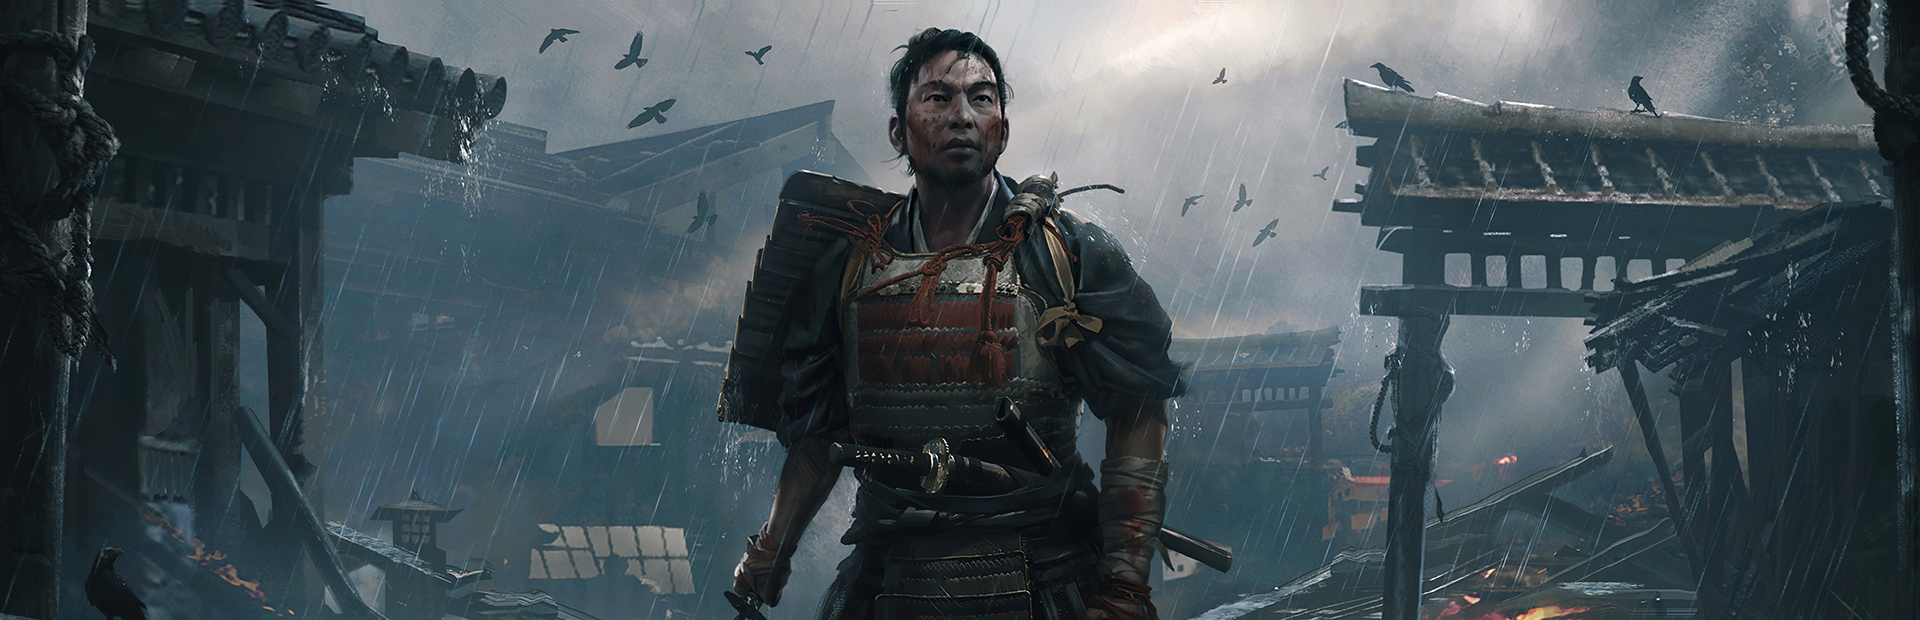 Ghost of Tsushima - SteamGridDB